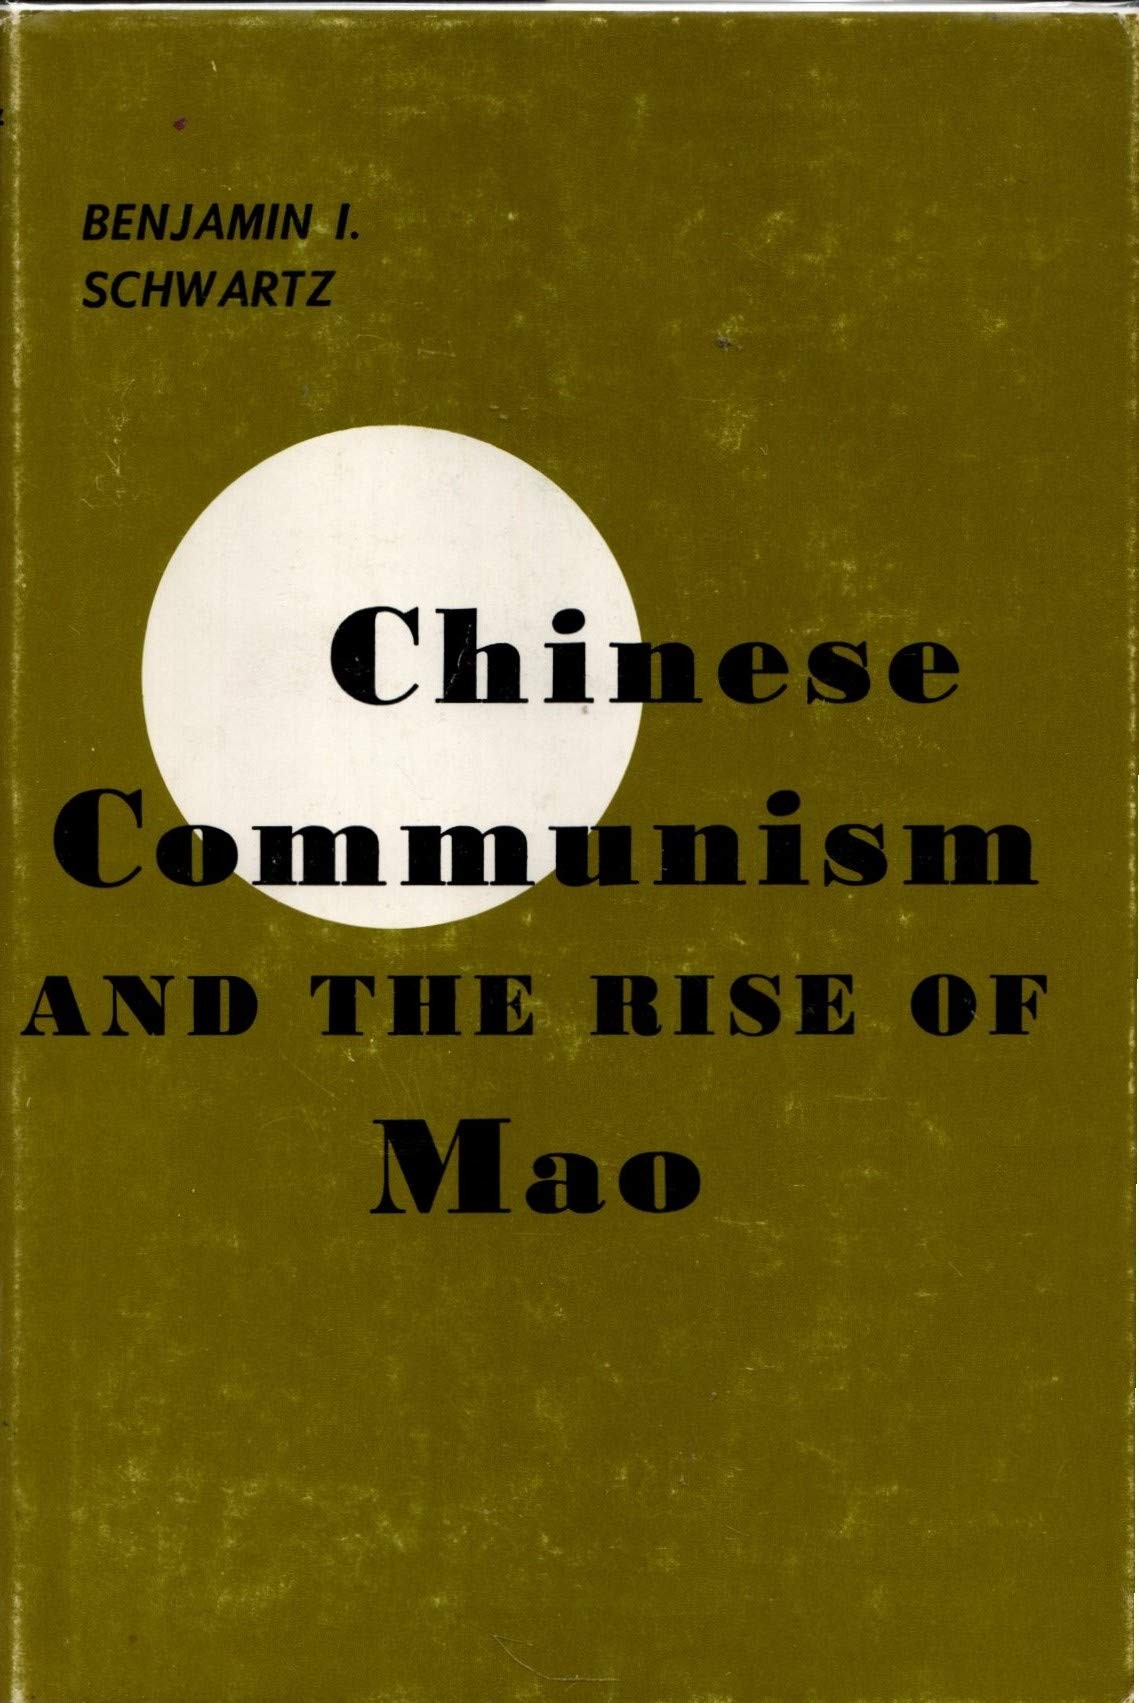 Chinese Communism and the Rise of Mao